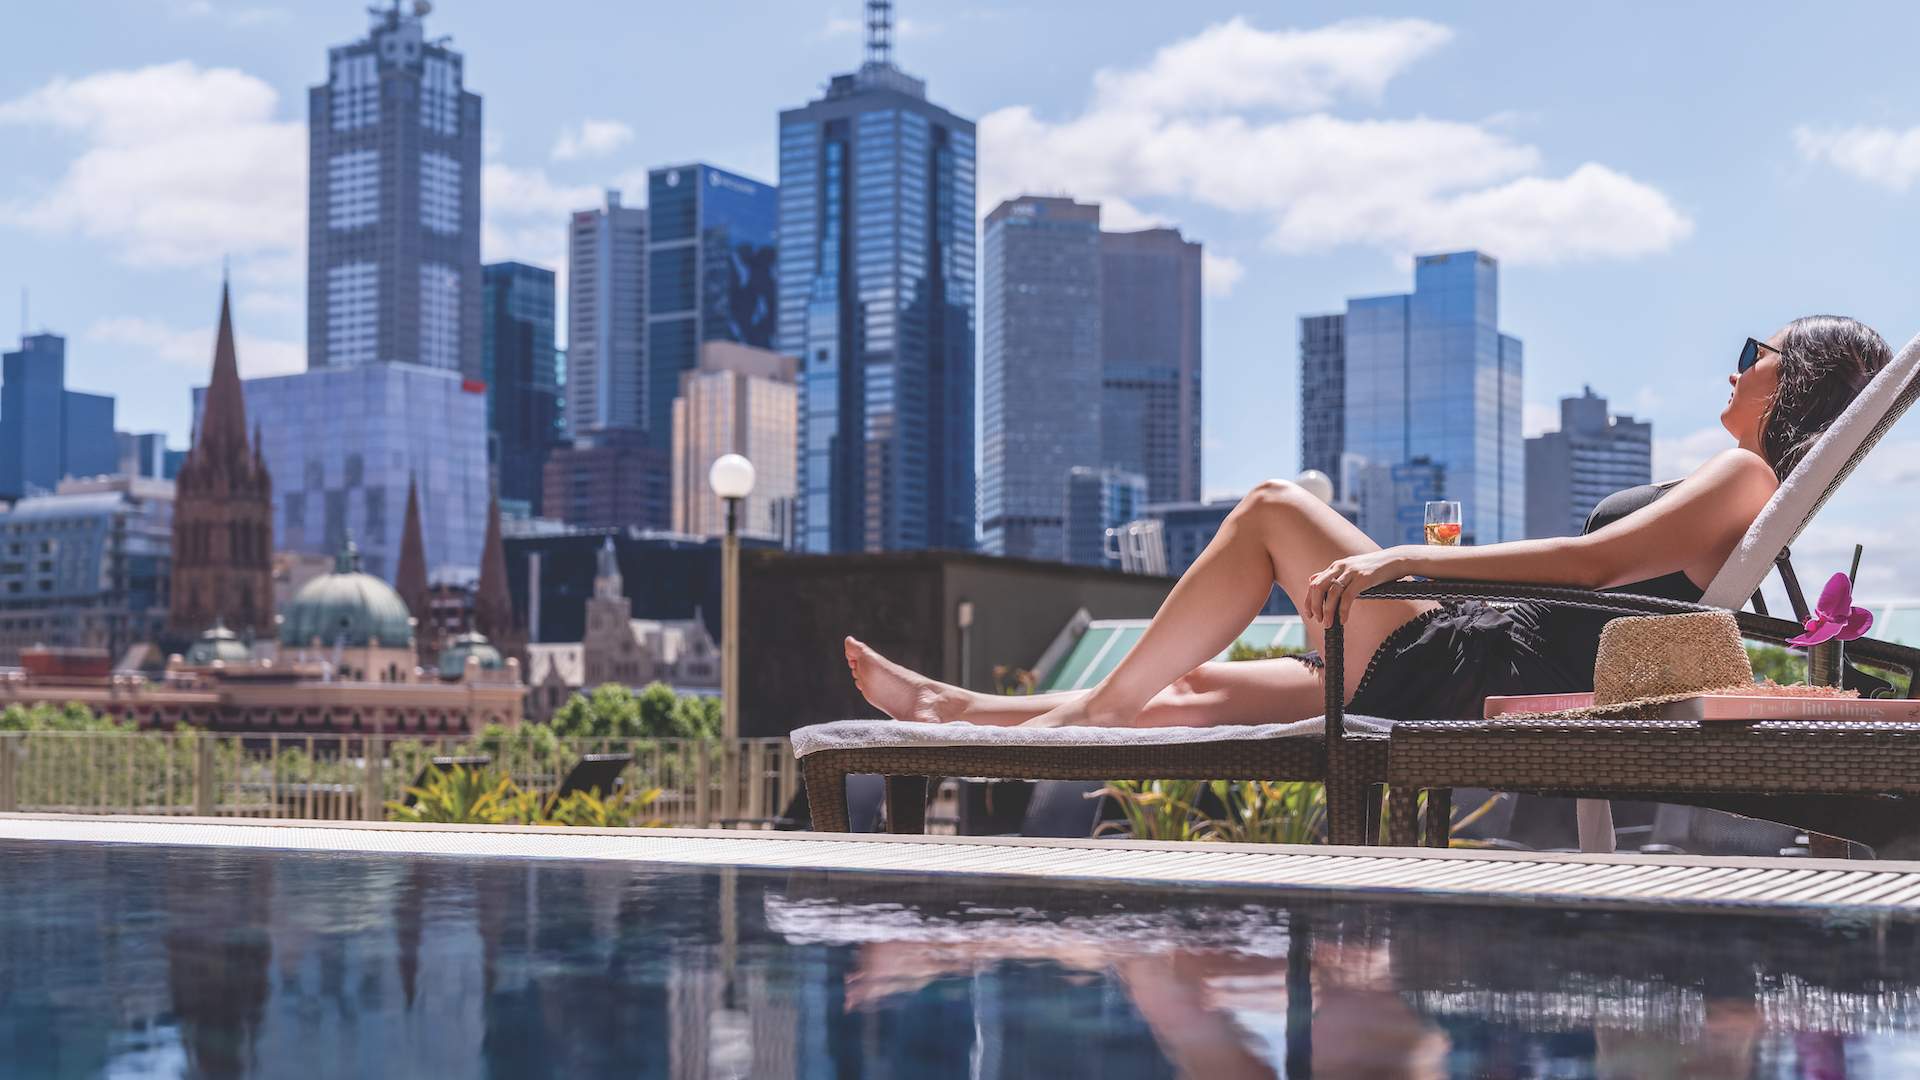 The rooftop pool at The Langham - one of the best hotels in Melbourne.